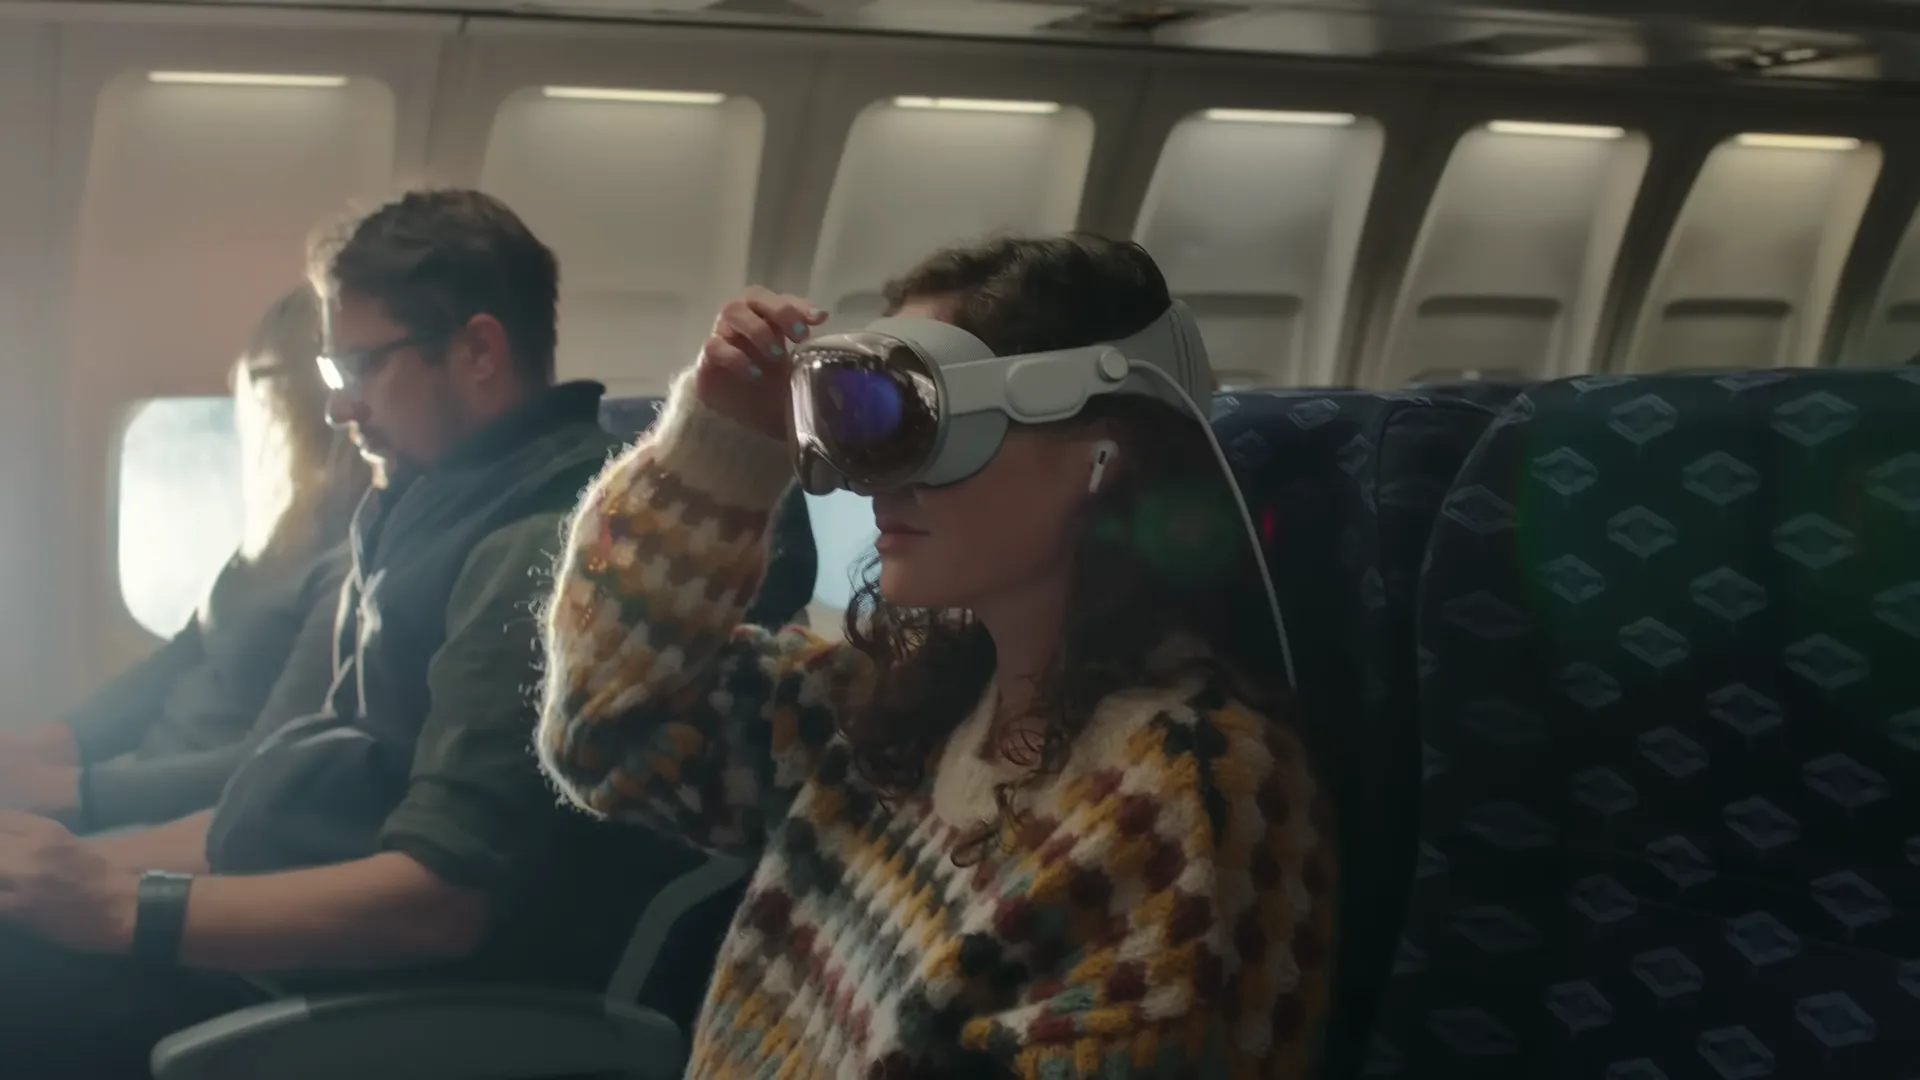 A totally normal human wearing Apple Vision Pro on a plane.